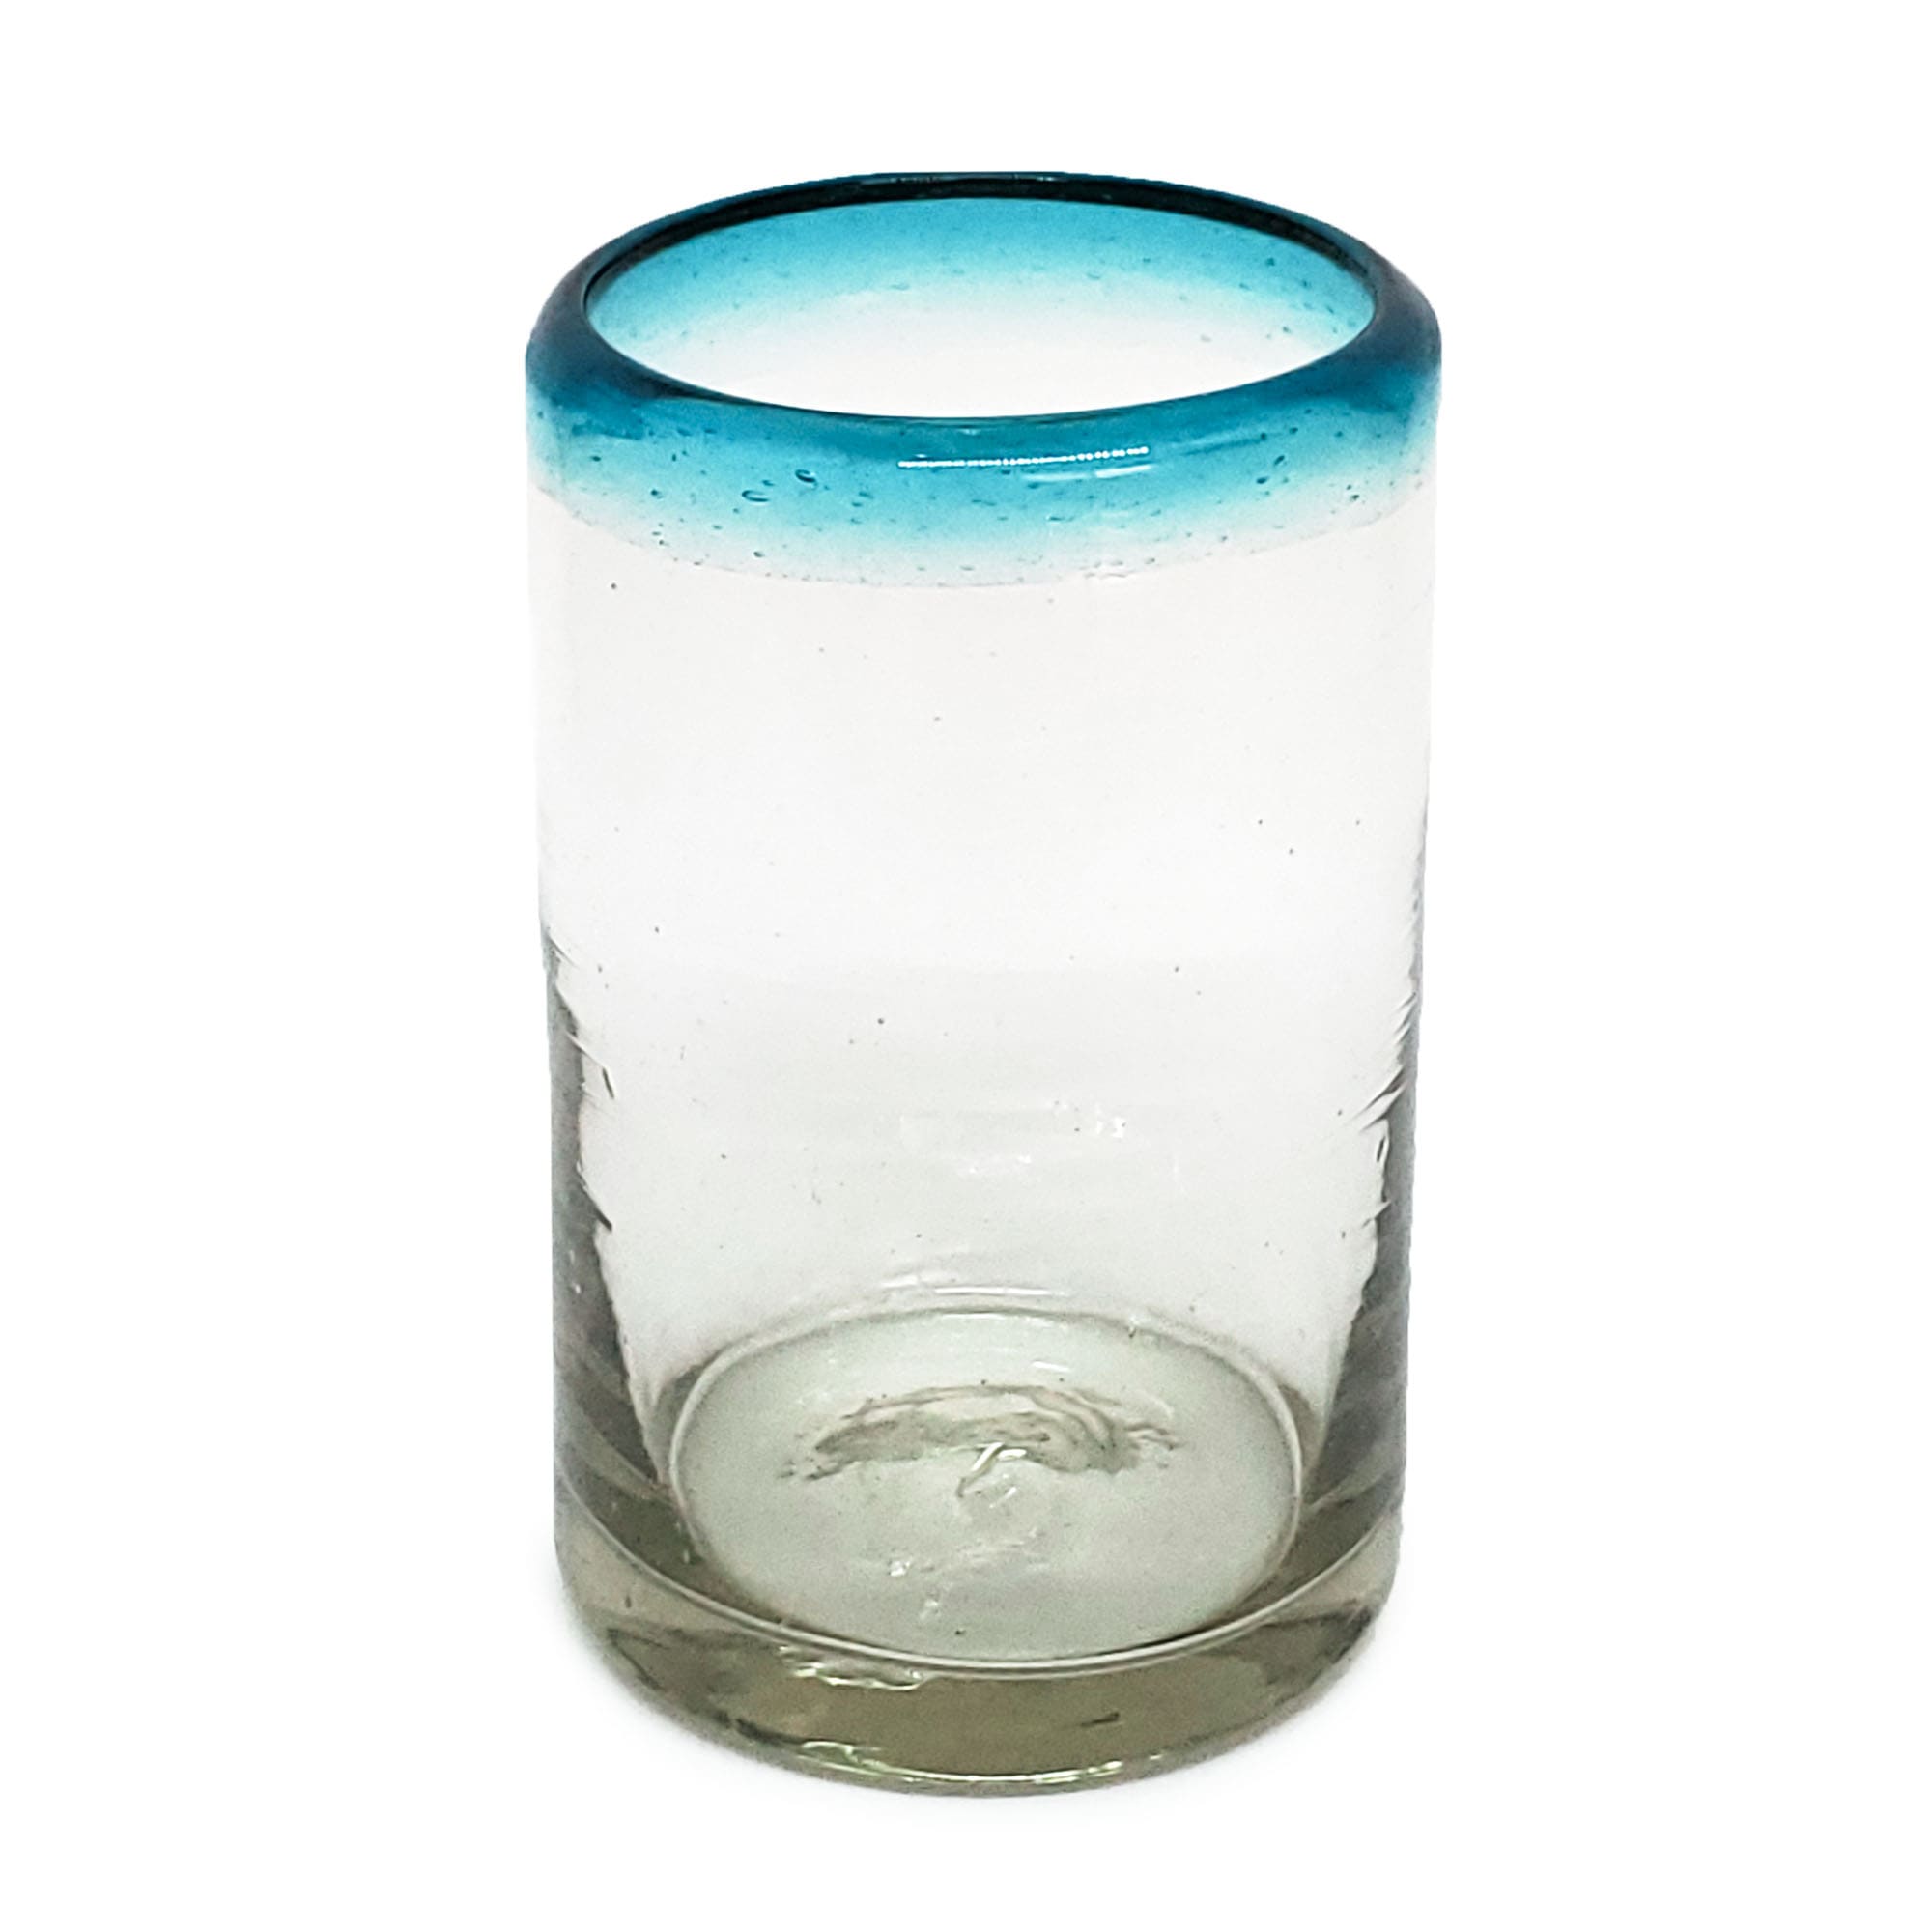 Wholesale Colored Rim Glassware / Aqua Blue Rim 9 oz Juice Glasses  / These glasses are just the right size to enjoy fresh squeezed fruit juice in the moning.